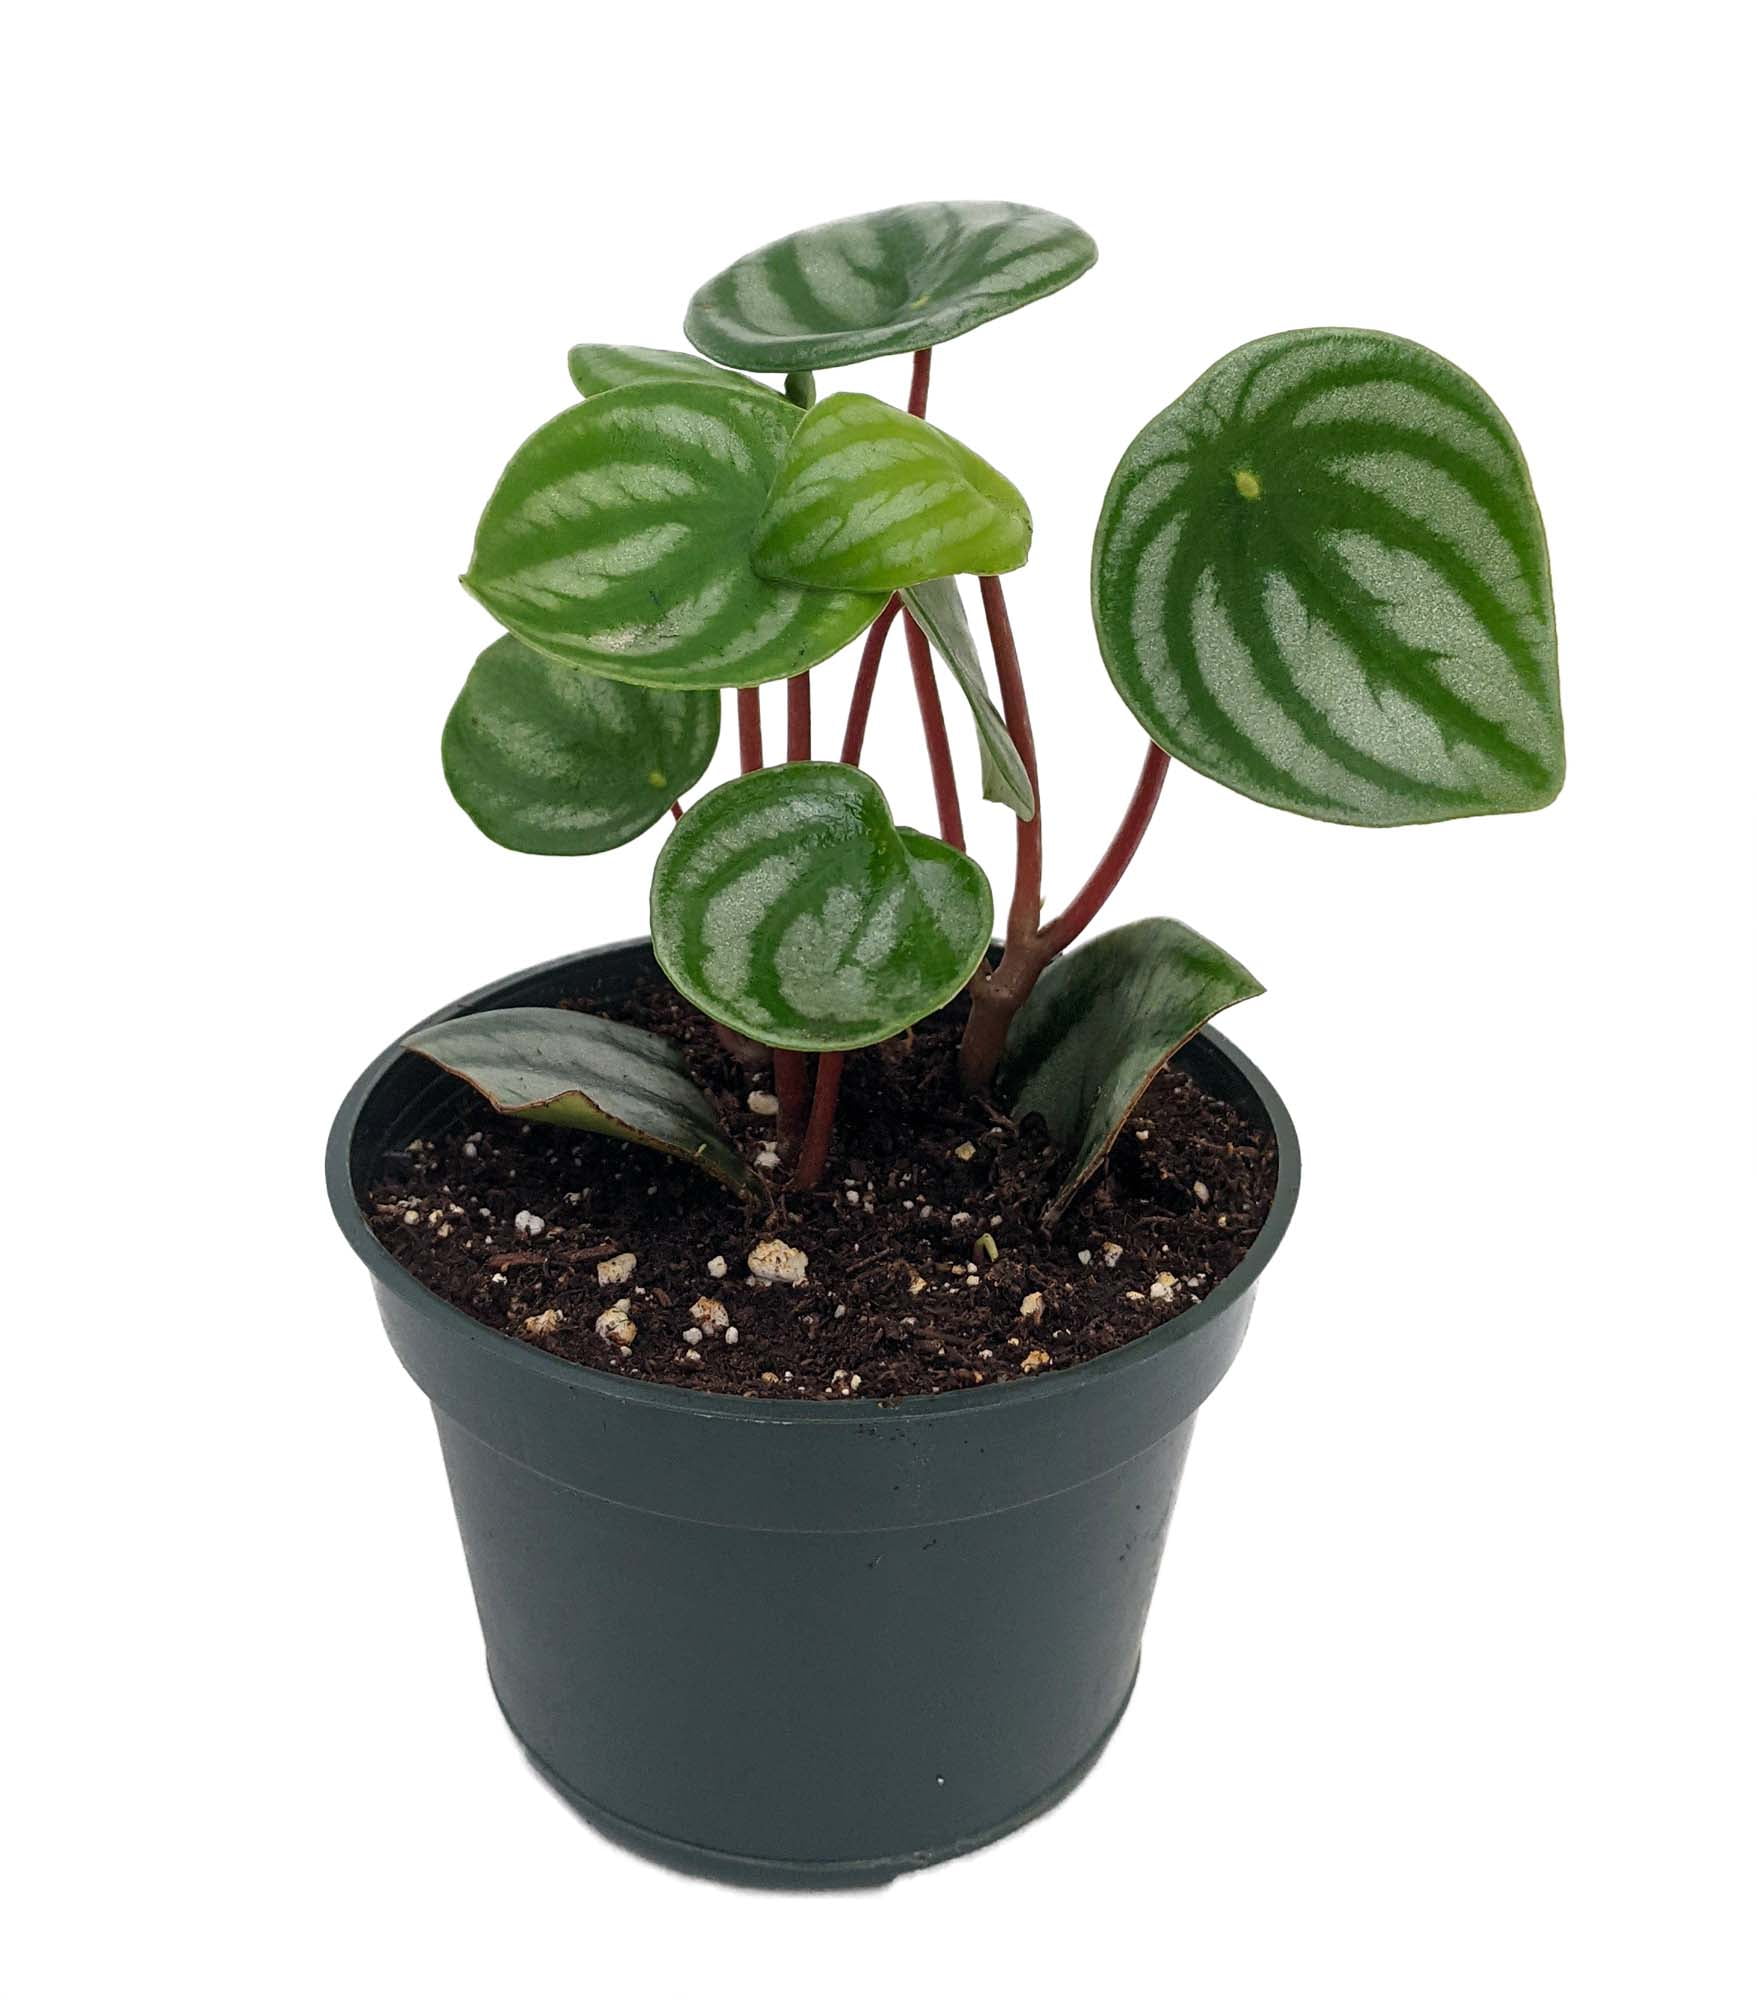 Live Rooted-Peperomia Frost 6” Pot Easy to Grow Houseplant Rare